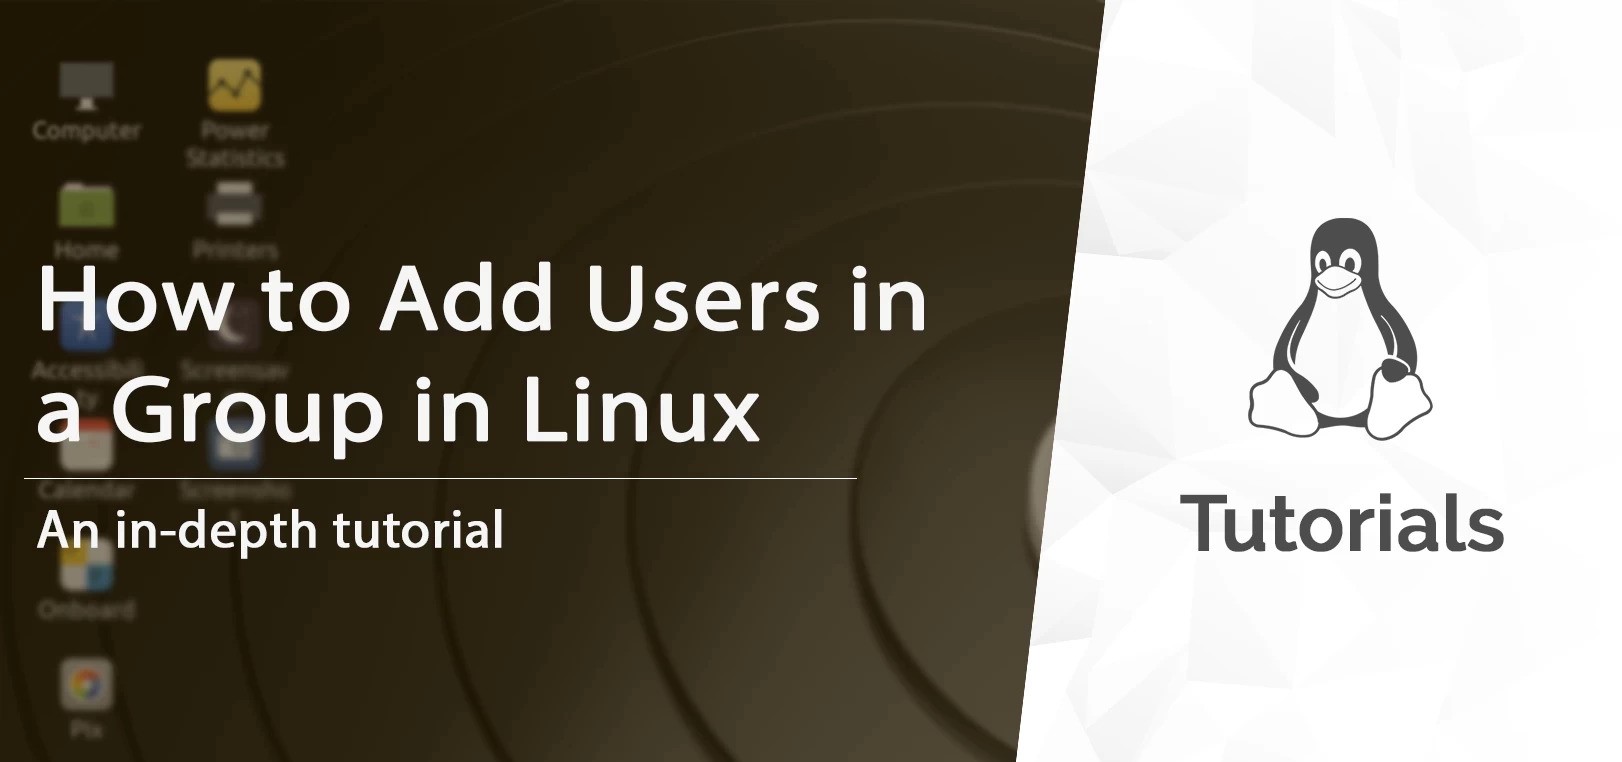 Adding Users to Groups in Linux